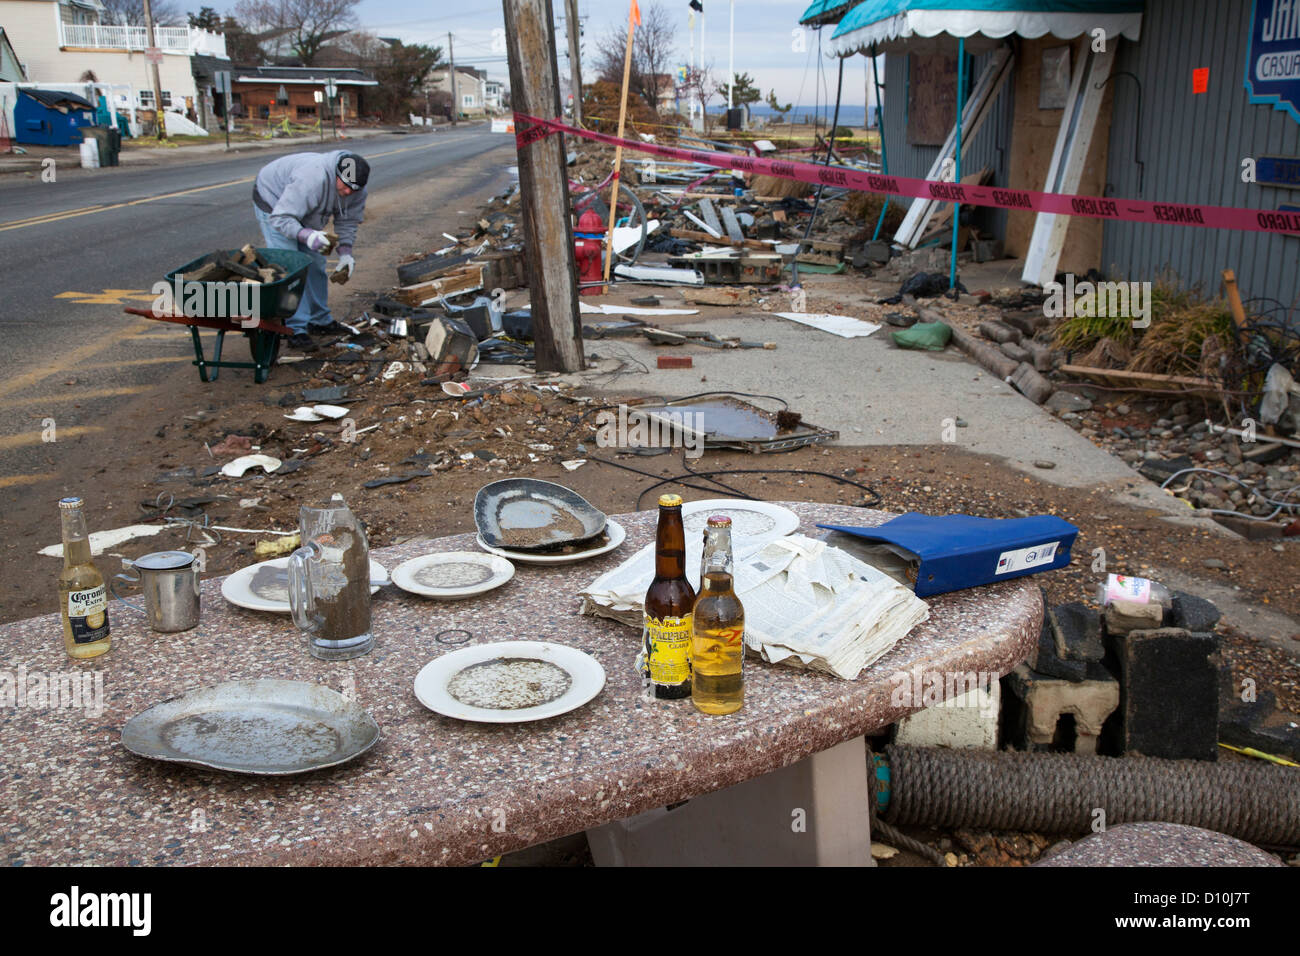 Union Beach, New Jersey - A man cleans up outside Jakeabob's Bay waterfront restaurant, heavily damaged by Hurricane Sandy. Stock Photo